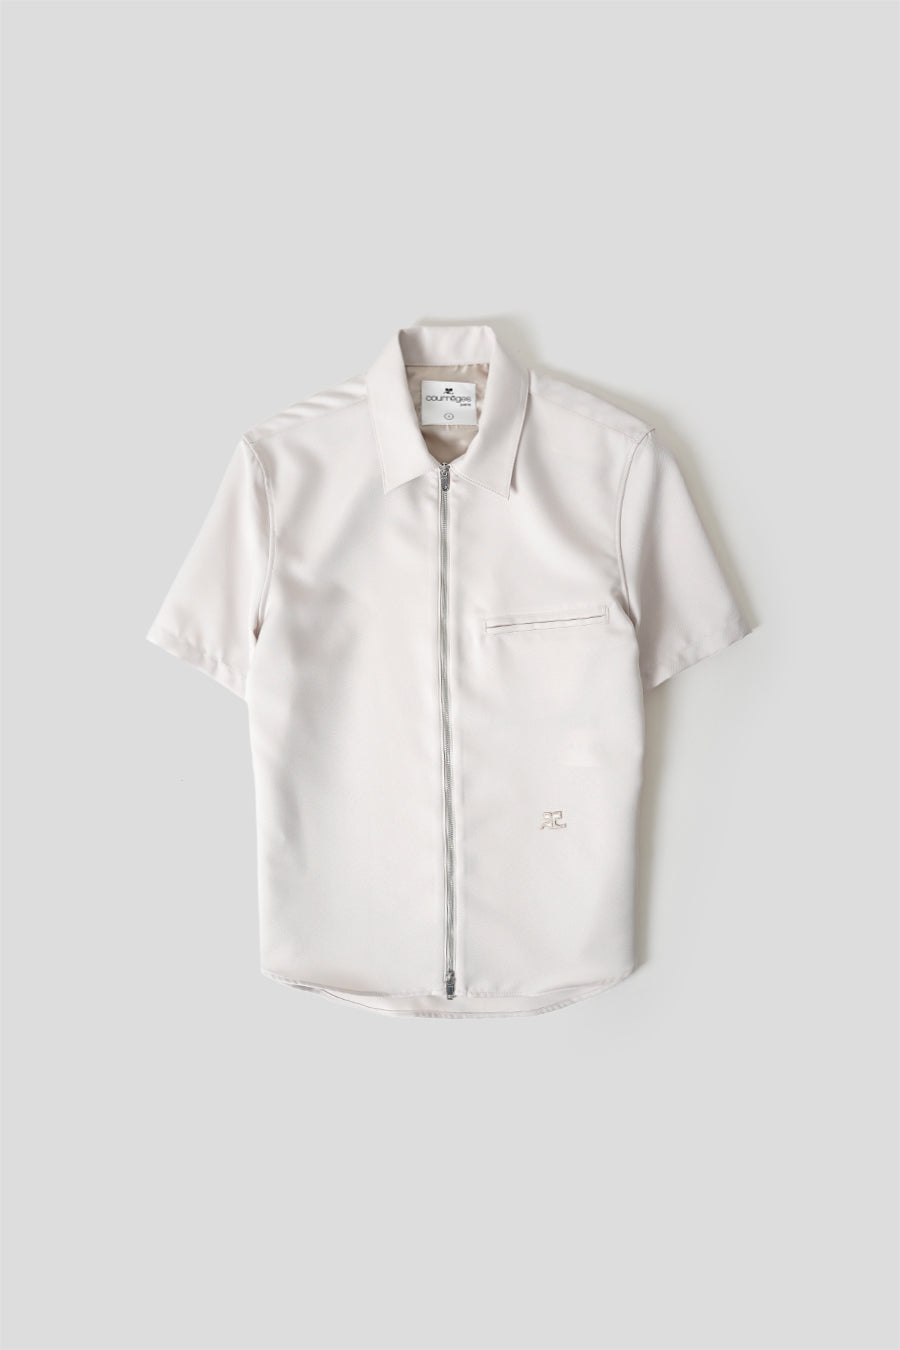 COURRÈGES - LIMESTONE ZIPPED IN TWILL SHIRT   - LE LABO STORE